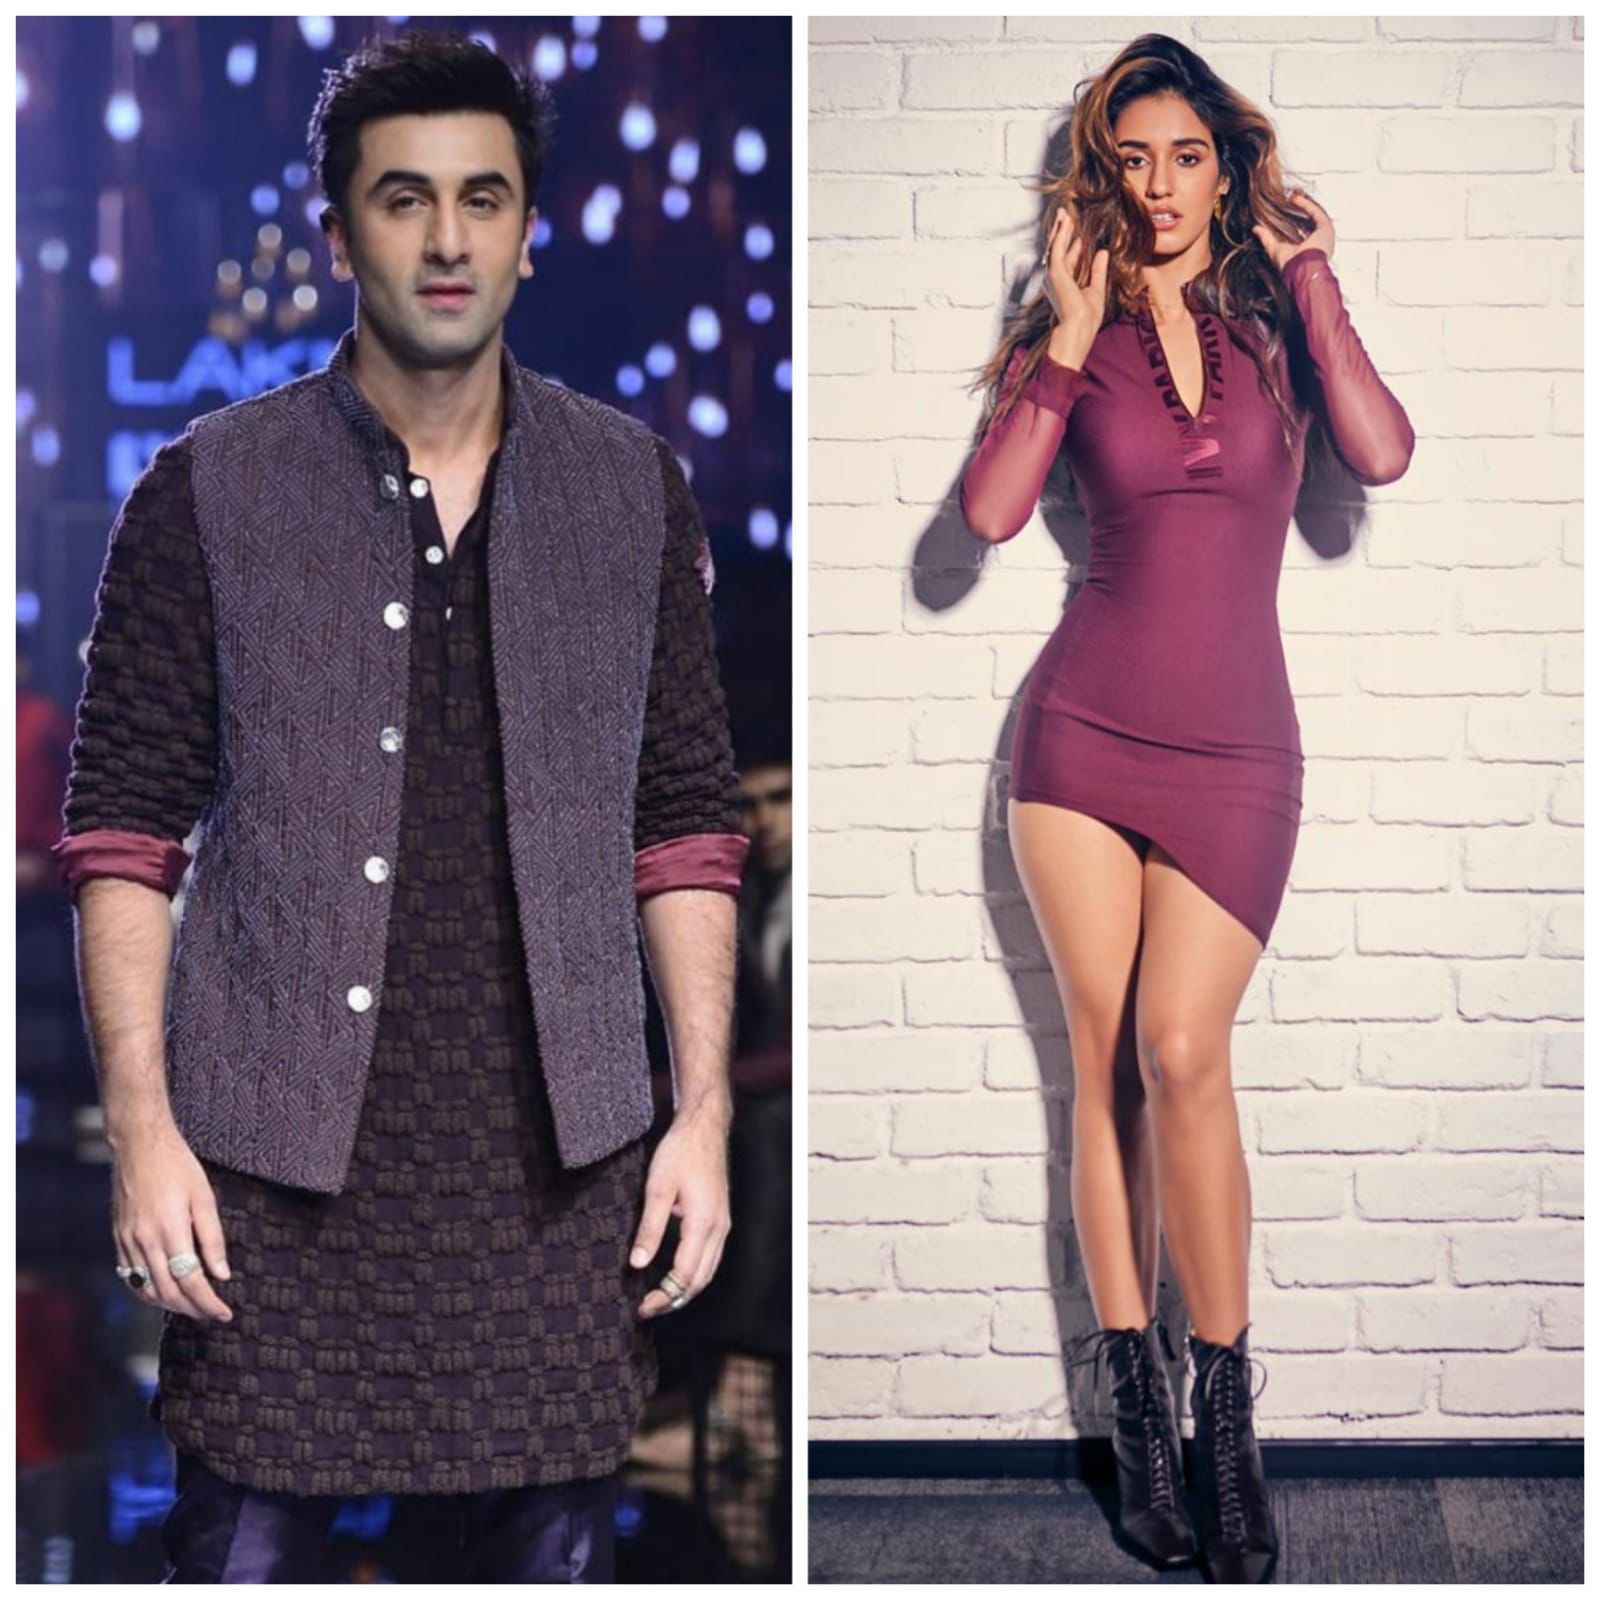 Bollywood's Fresh Zing Of New Pairs Has Just Begun; Which Bollywood Actor Would Look The Best Opposite Disha Patani?